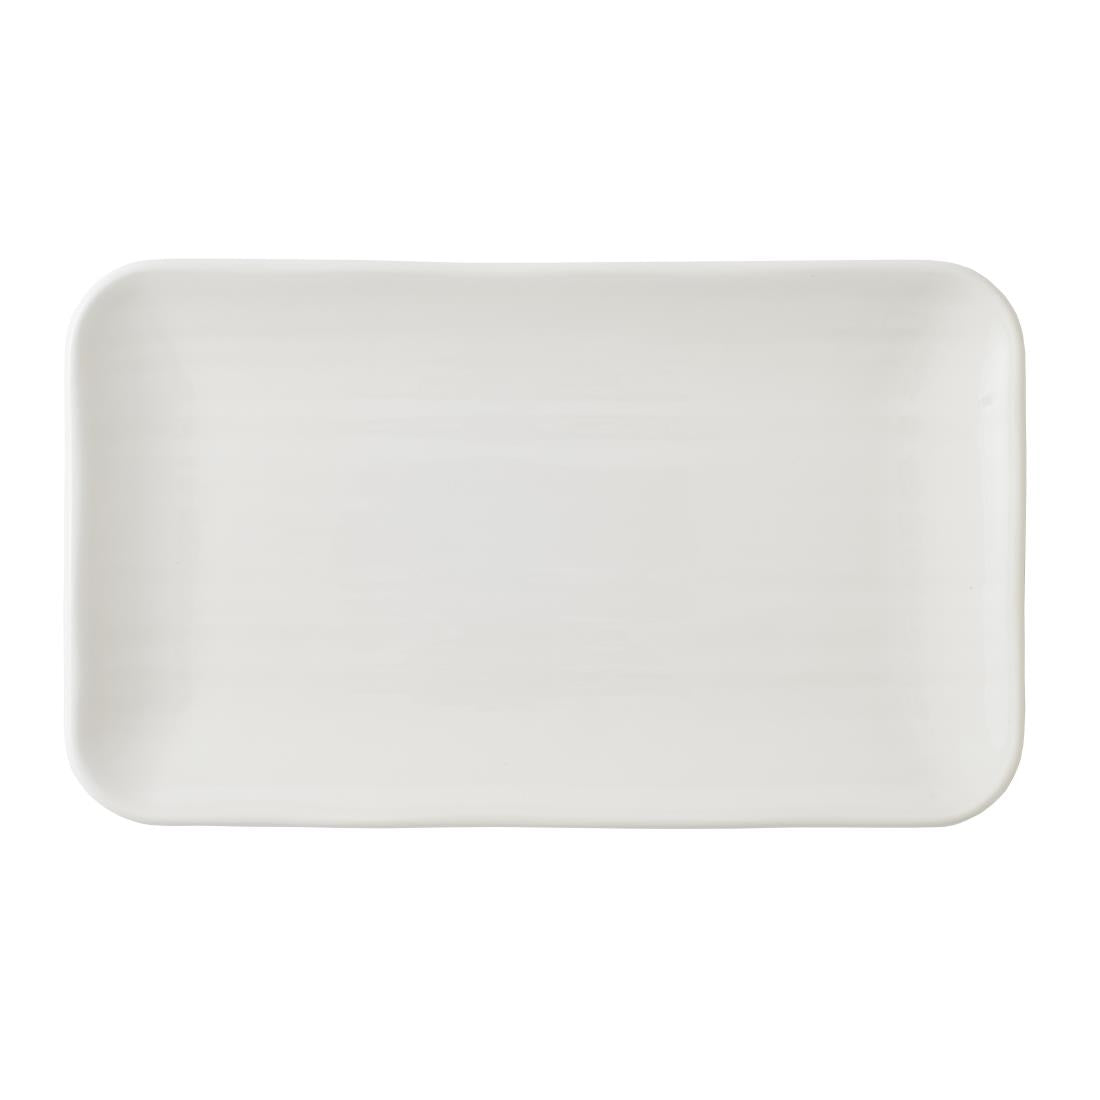 CU678 Churchill Dudson Harvest Norse White Organic Rectangular Plate 270 x 160mm (Pack of 12) JD Catering Equipment Solutions Ltd